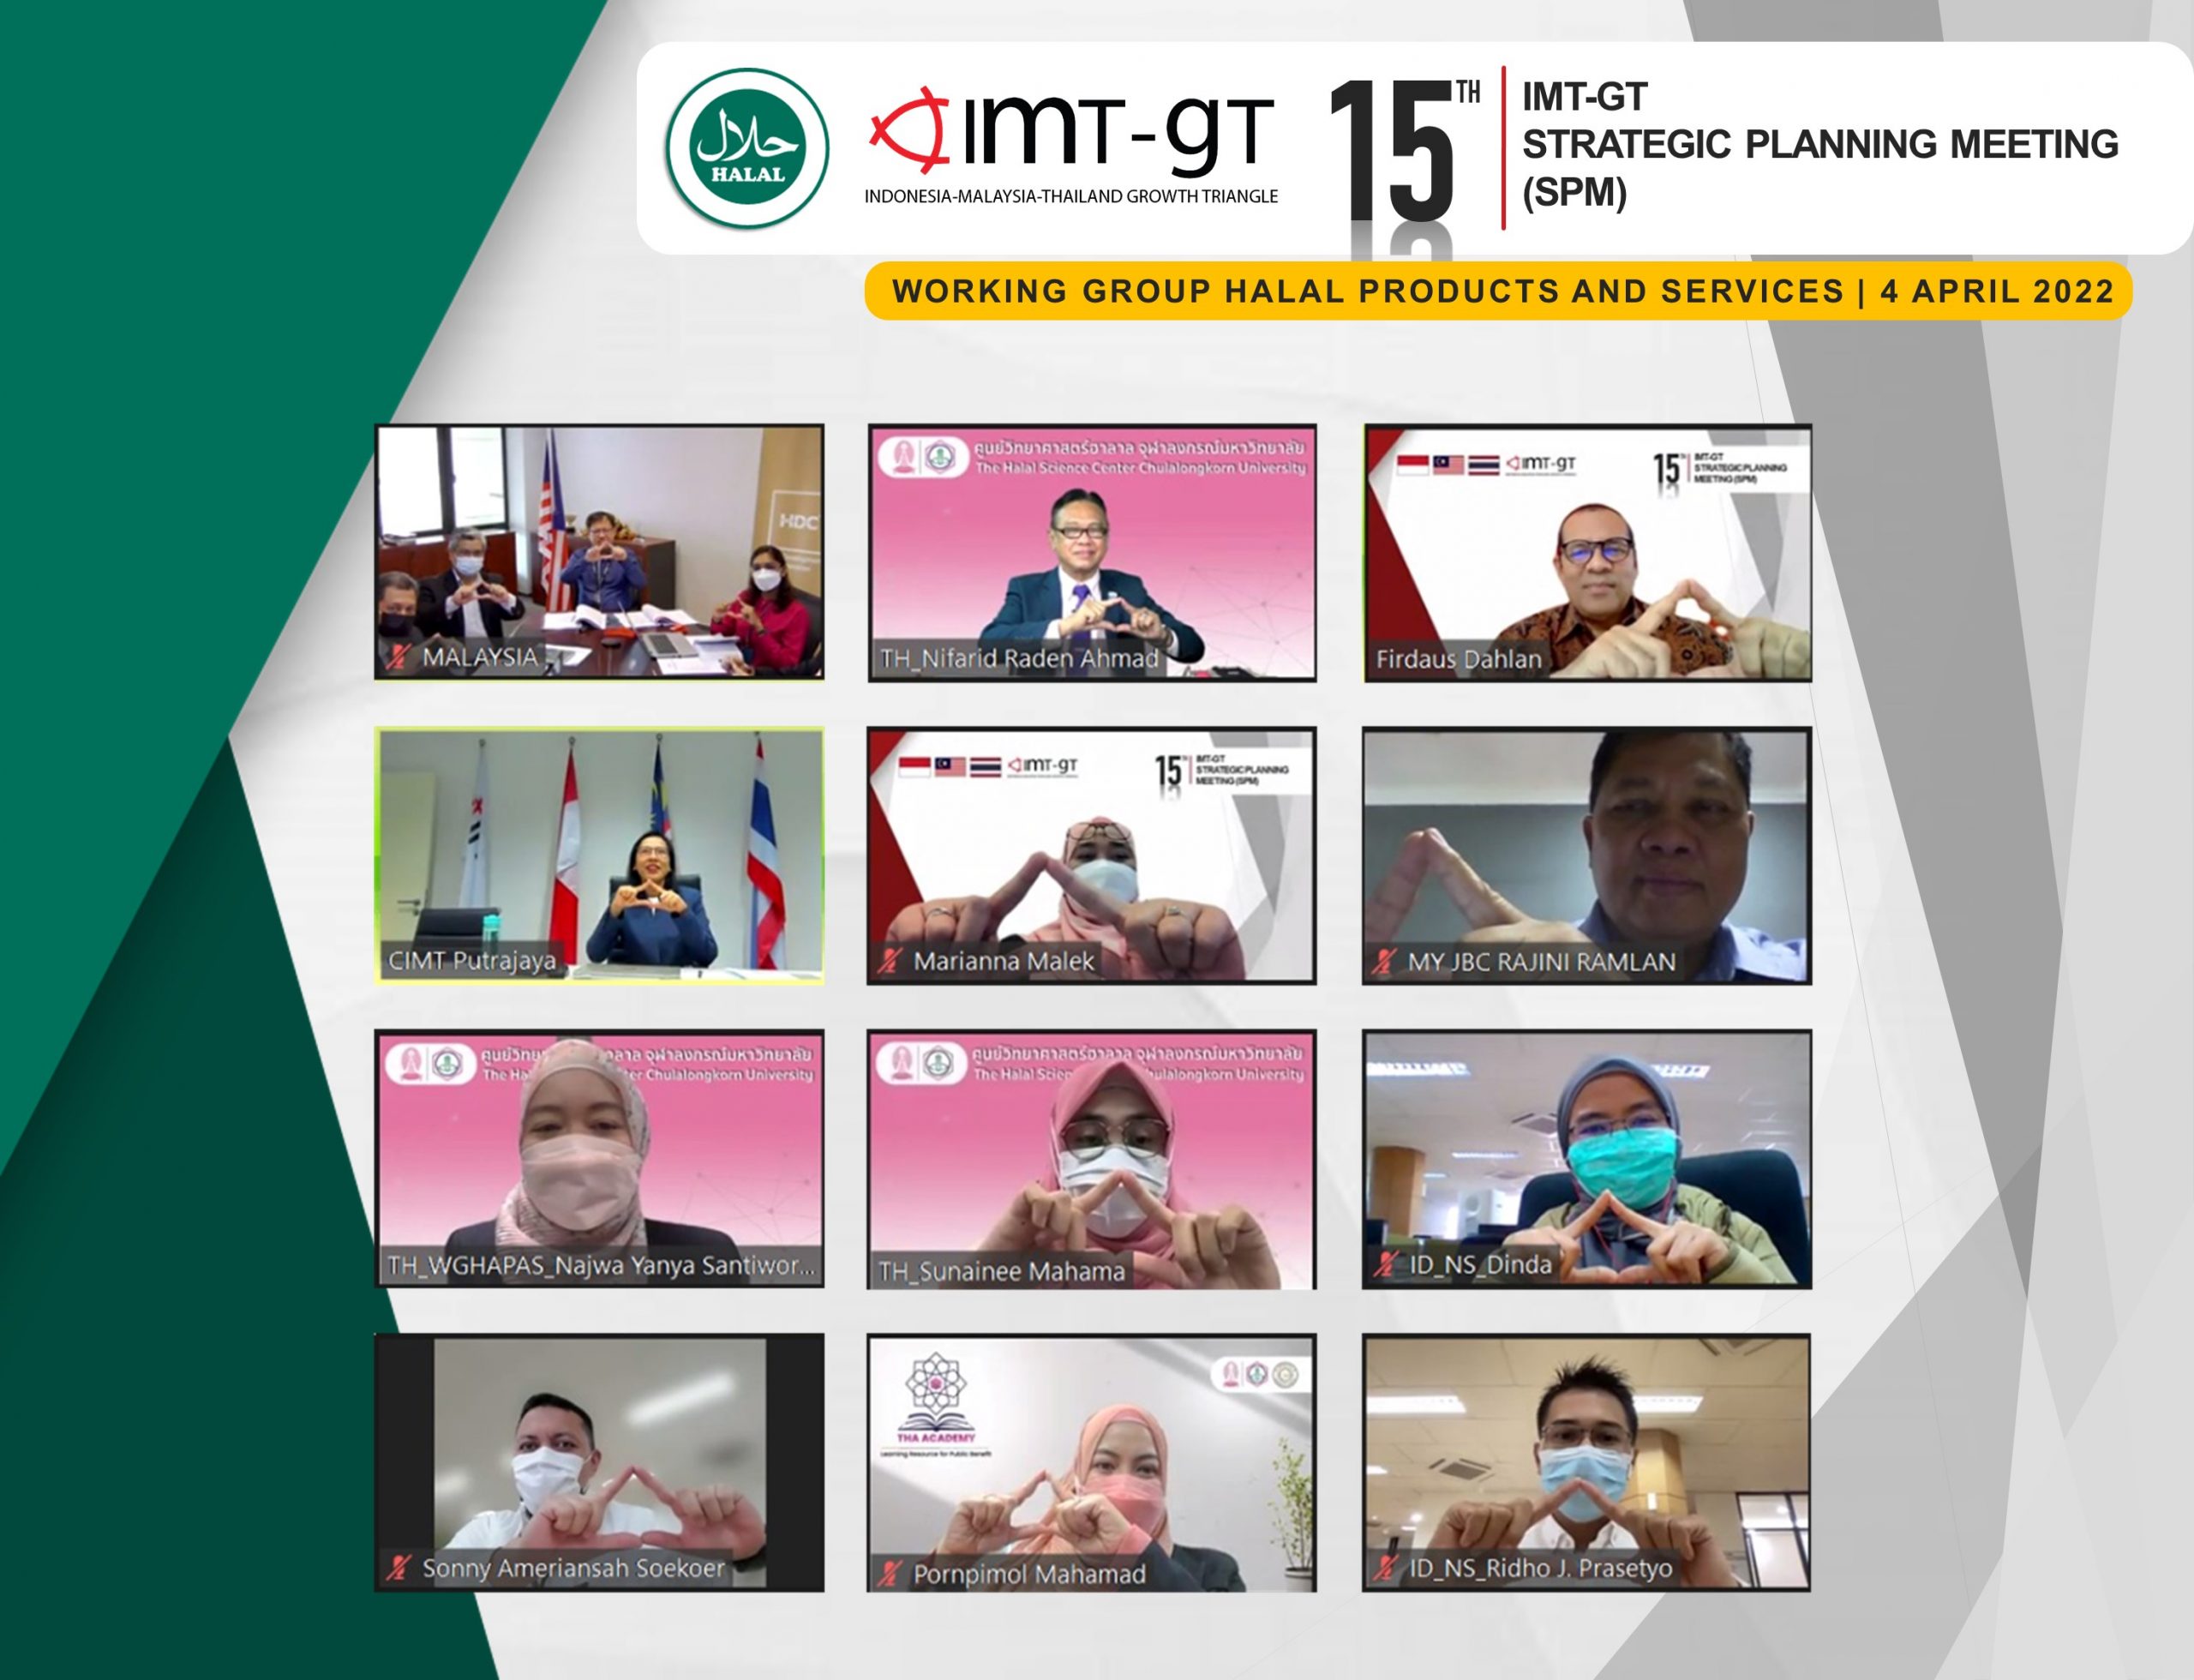 15TH IMT-GT STRATEGIC PLANNING MEETING (SPM) – BREAKOUT SESSION OF WORKING GROUP ON HALAL PRODUCTS AND SERVICES (WGHAPAS)